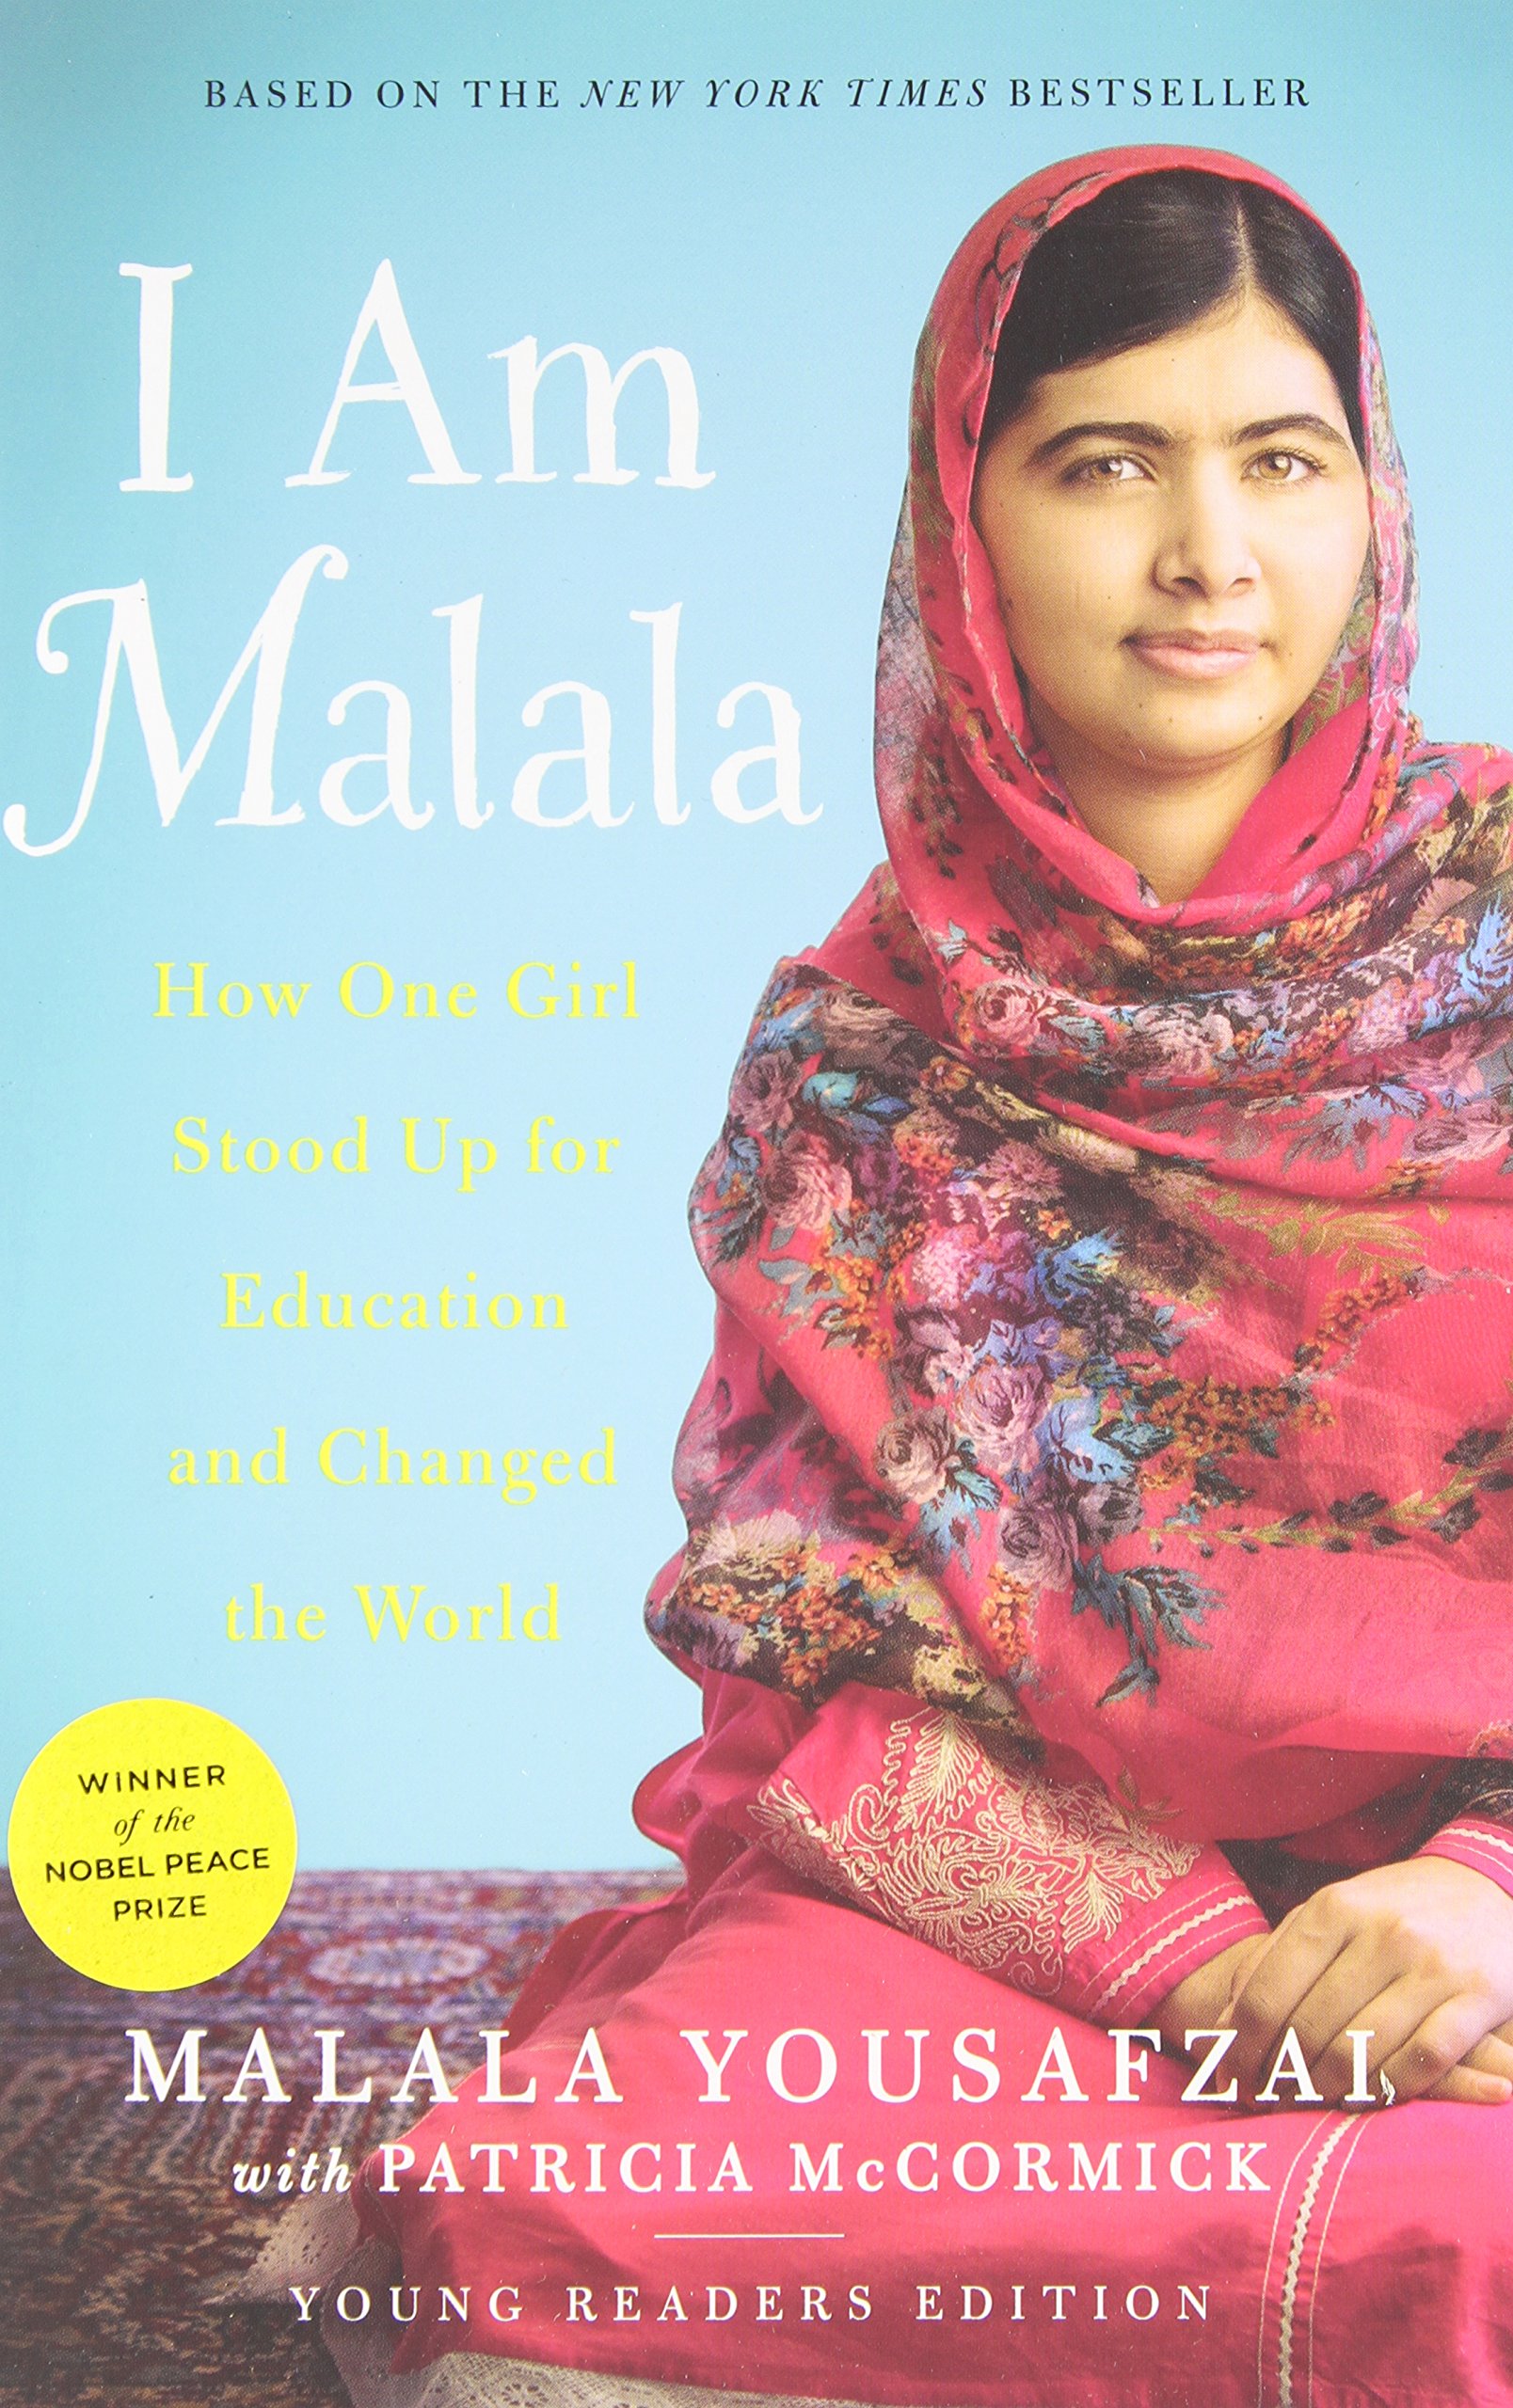 I+Am+Malala%3A+How+One+Girl+Stood+Up+for+Education+and+Changed+the+World+%28Young+Readers+Edition%29